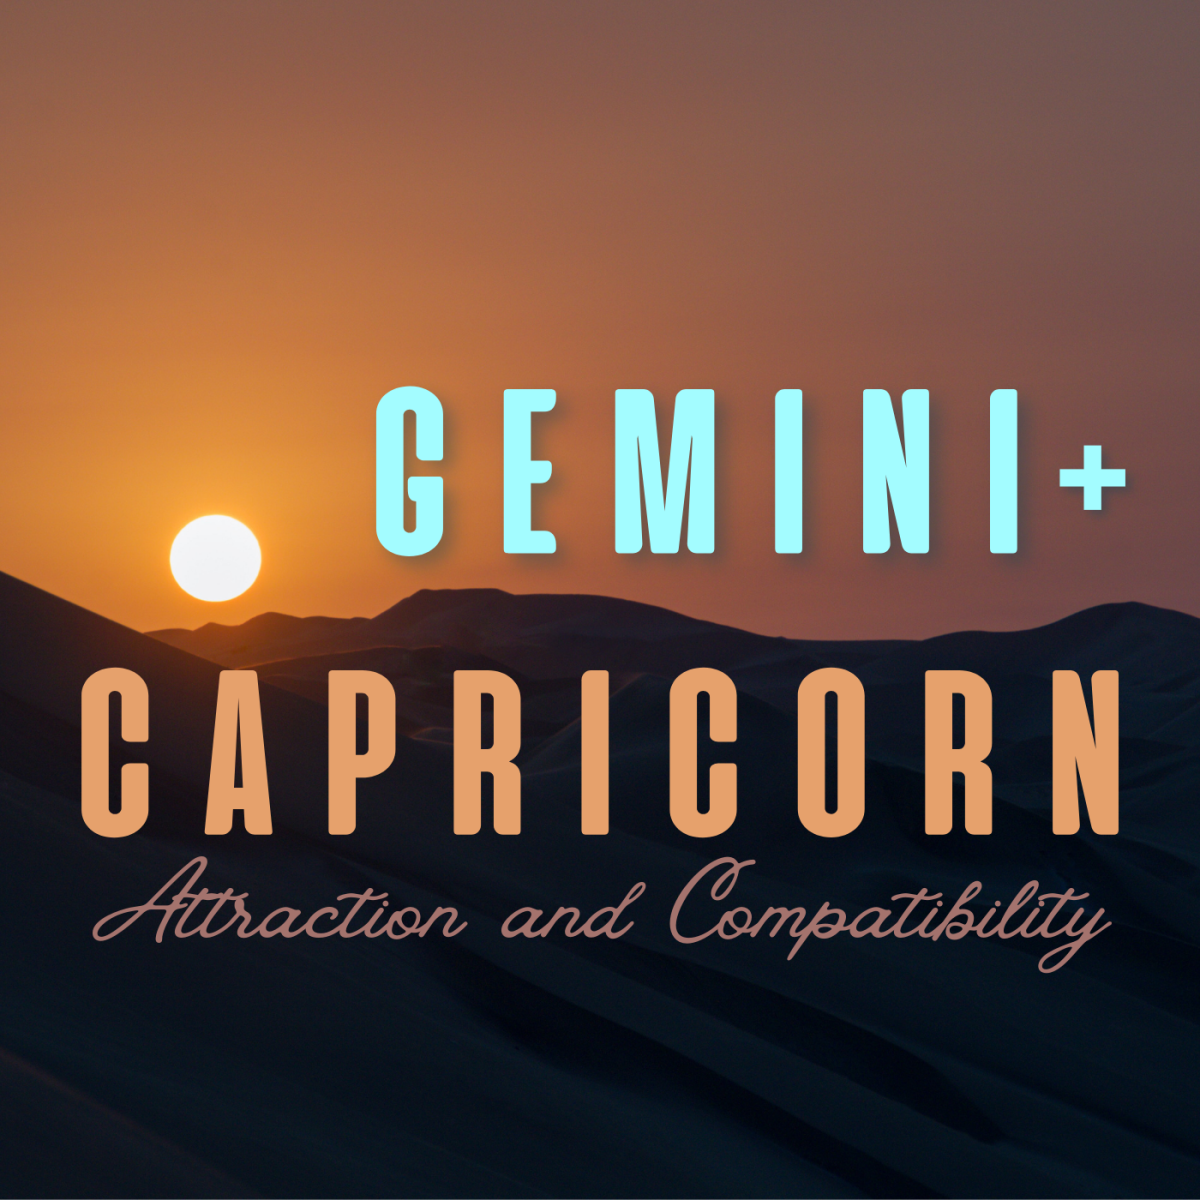 Do Gemini and Capricorn Get Along in a Relationship?